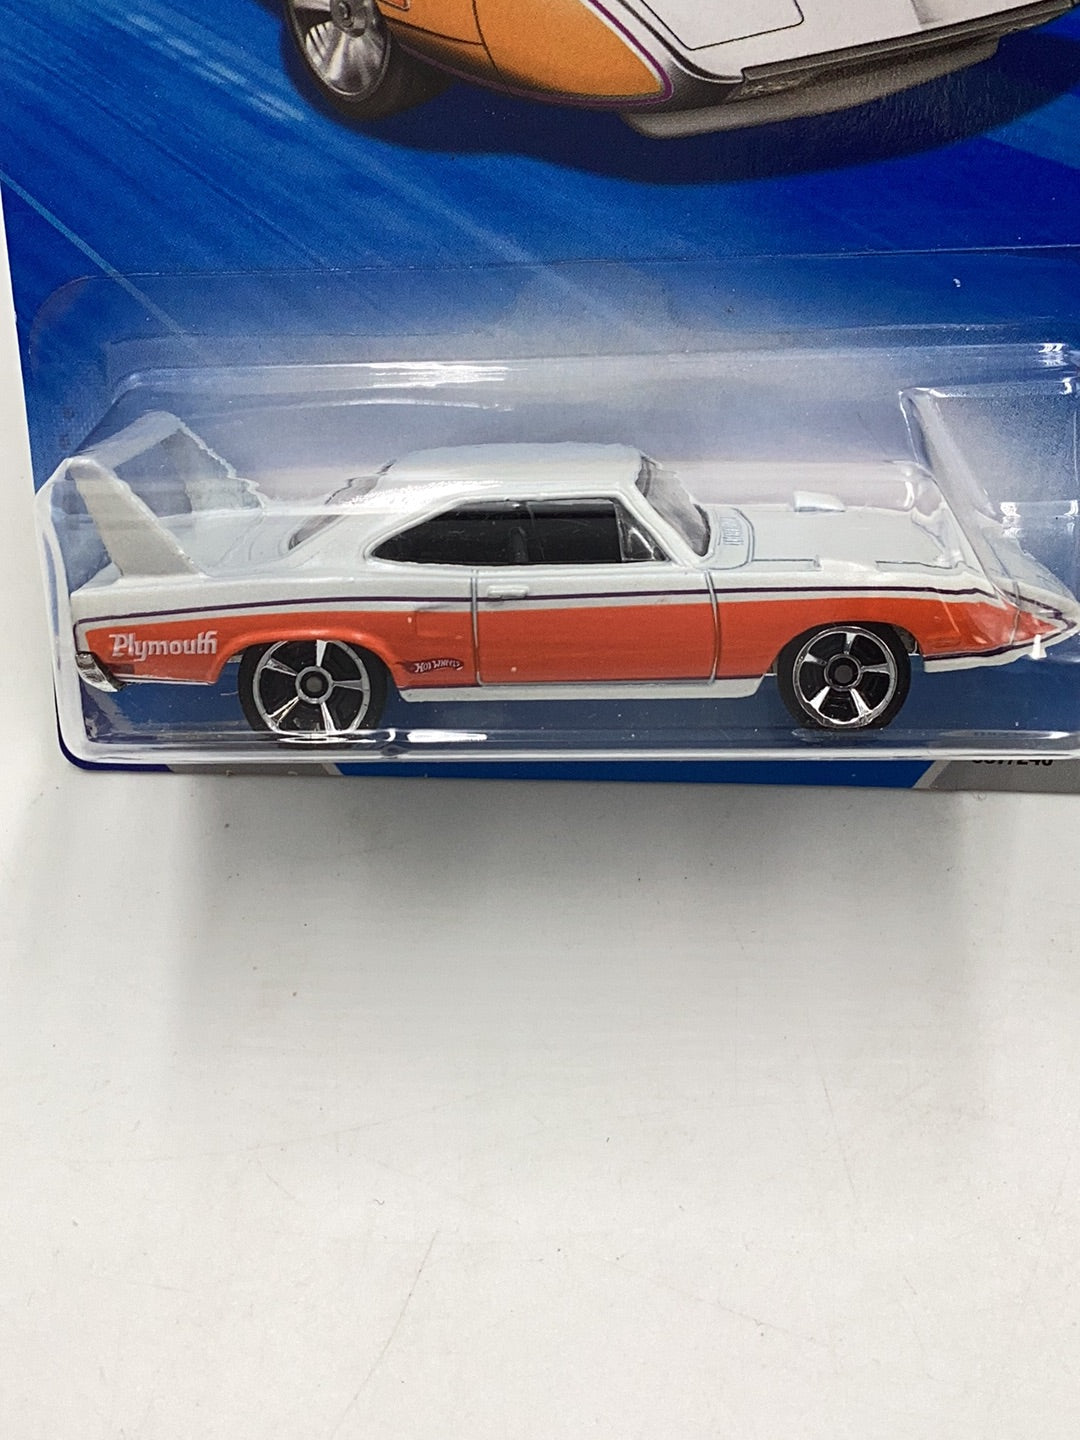 2010 Hot Wheels #87 70 Plymouth Superbird Kmart exclusive W/protector 239C